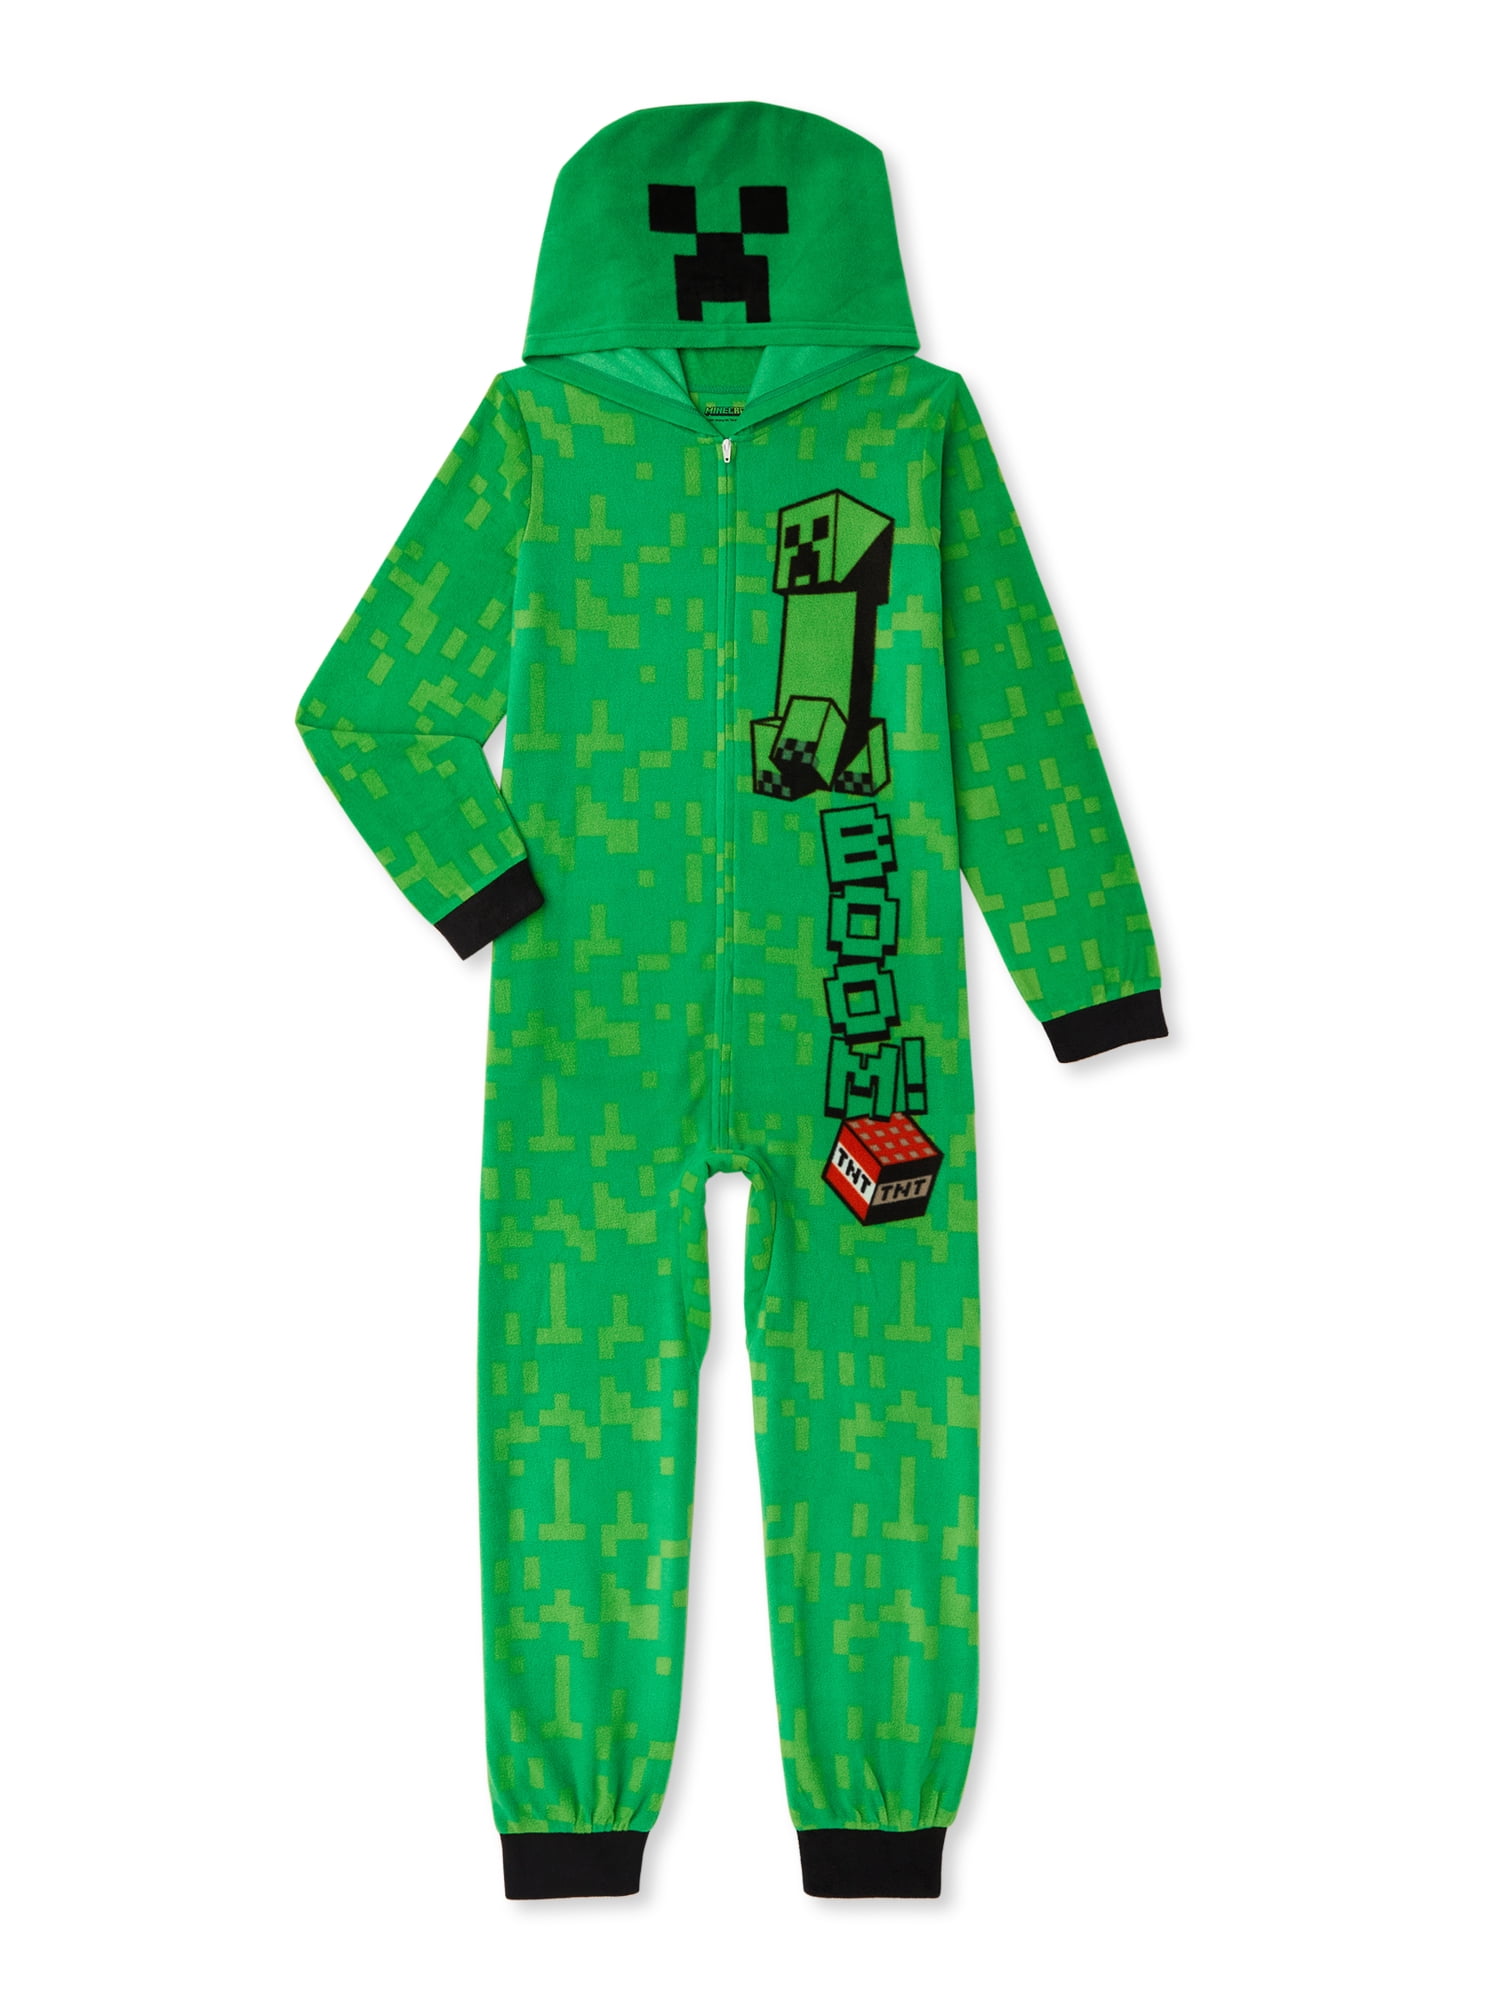 Video Game Pajamas Boy Size 4-5,8,10-12 One Piece Union Suit Blanket Sleeper NEW 